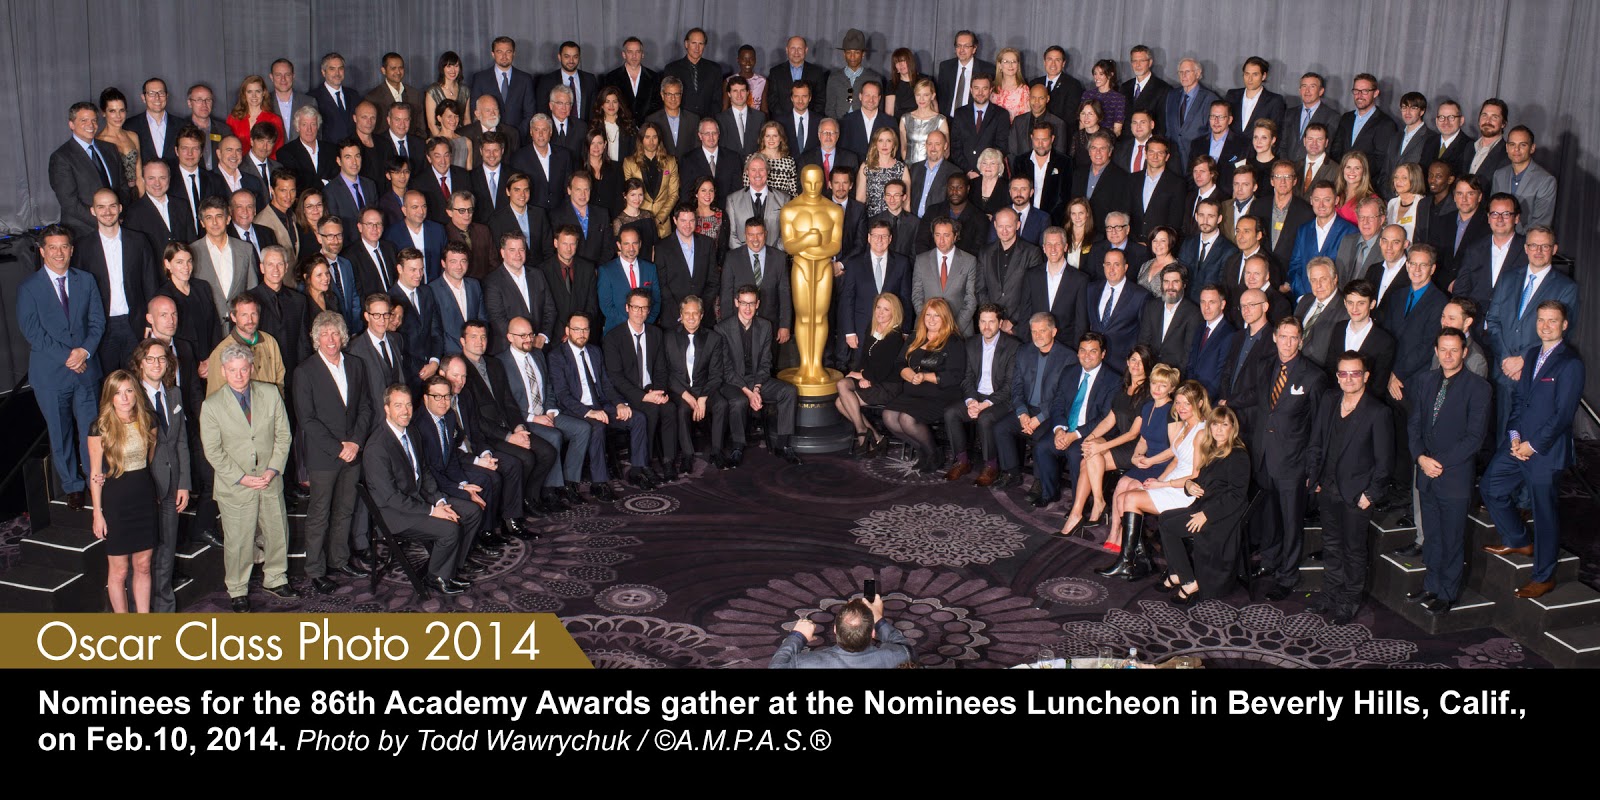 Oscars 2022 Nominees celebrated at luncheon The Gold Knight Latest